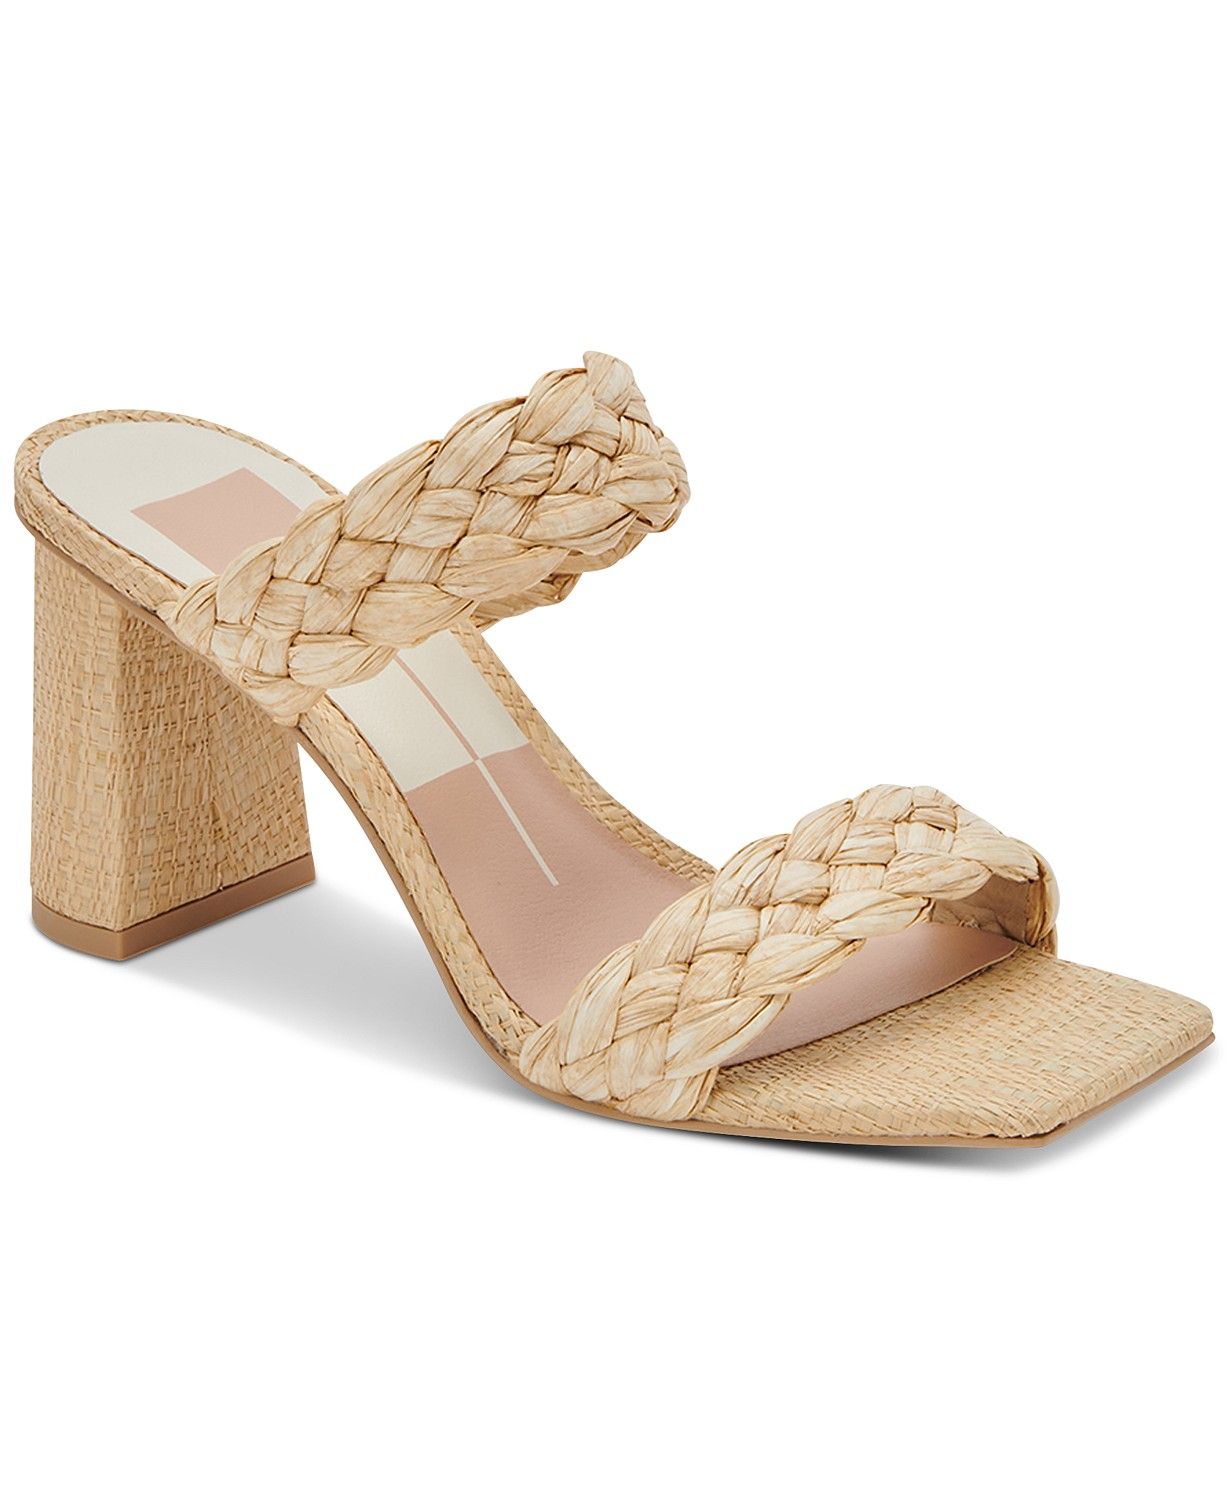 Dolce Vita Paily Braided Two-Band City Sandals & Reviews - Sandals - Shoes - Macy's | Macys (US)